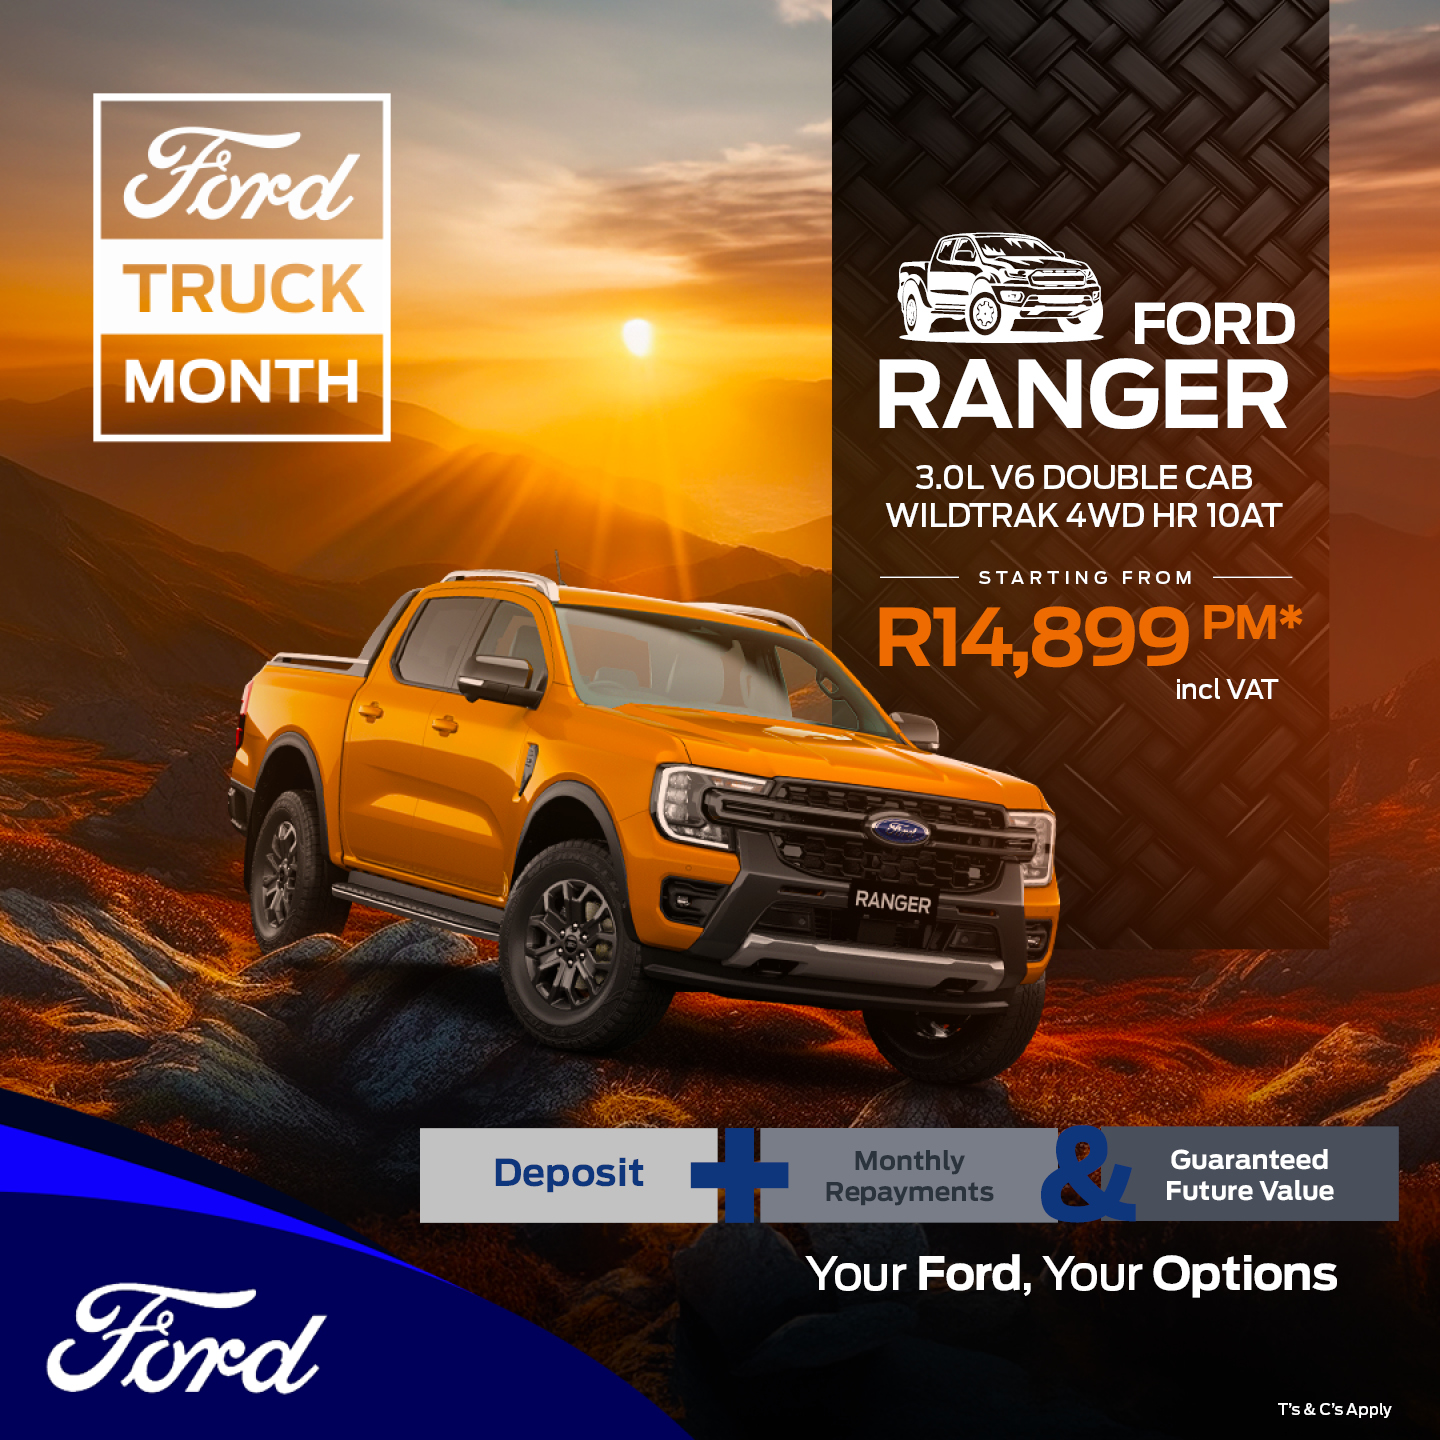 Ford Ranger 3.0L V6 Turbo Double Cab WildTrak 4WD HR 10AT image from 